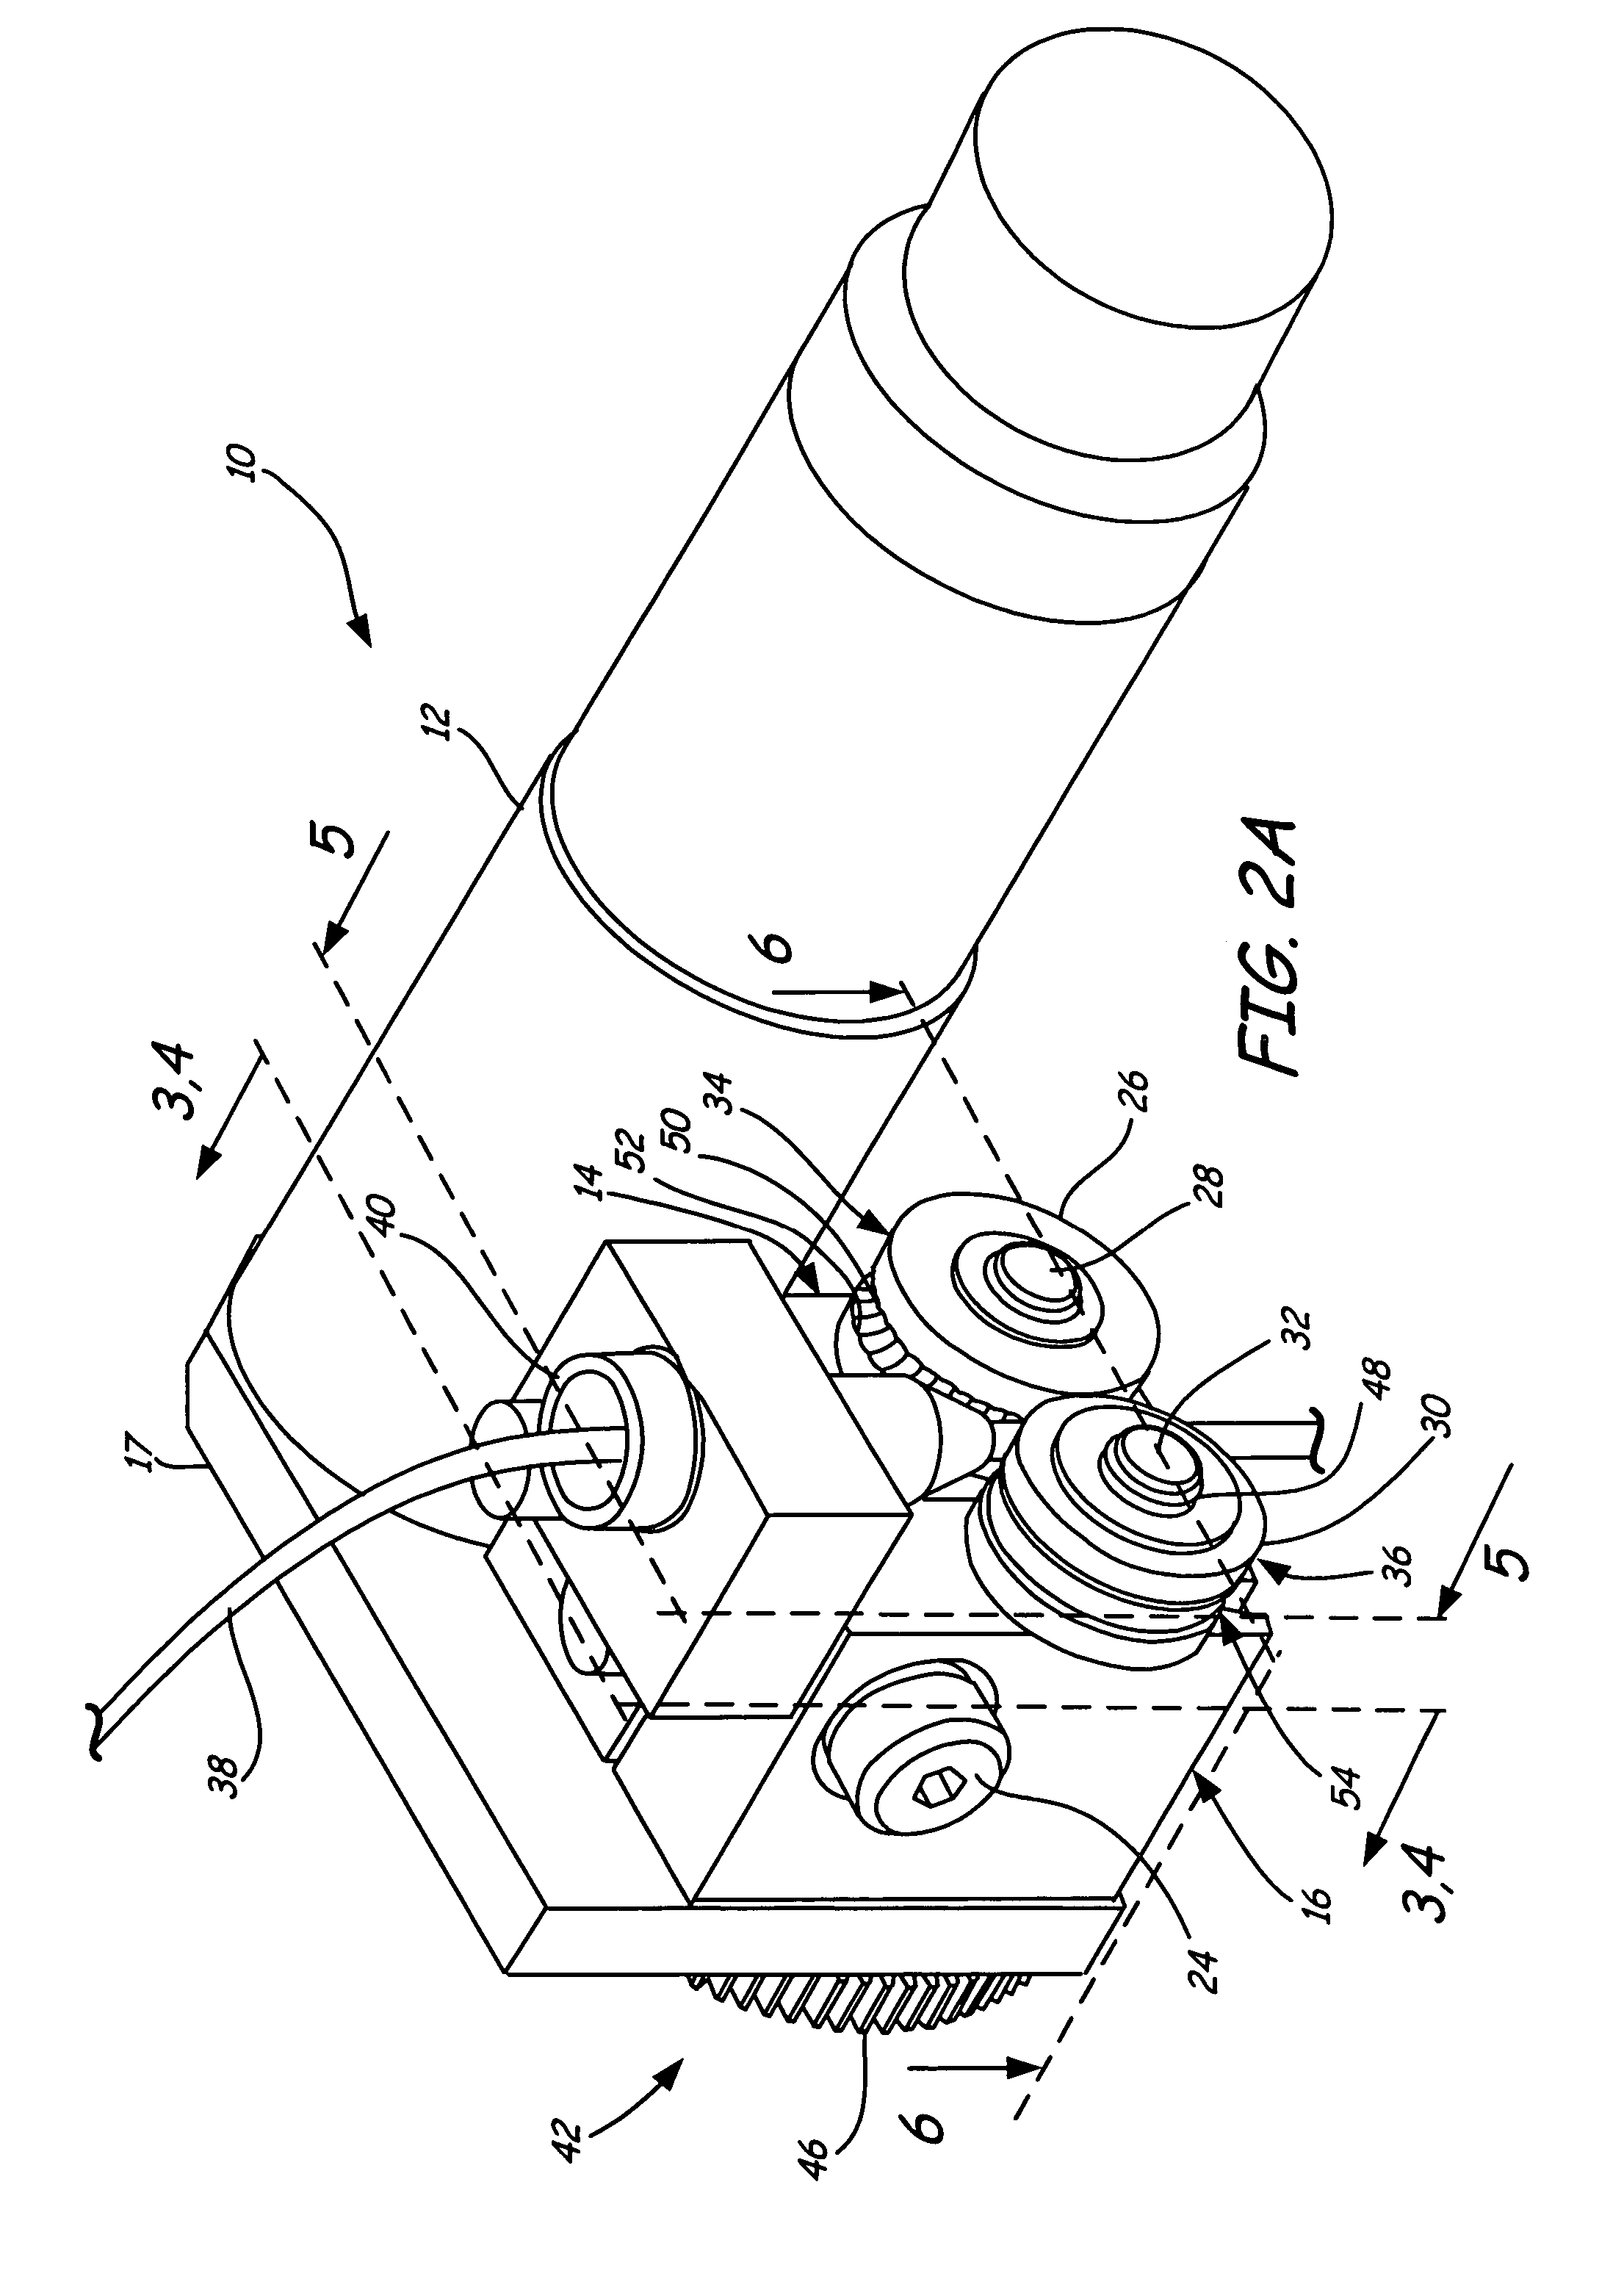 Rapid prototyping system with controlled material feedstock